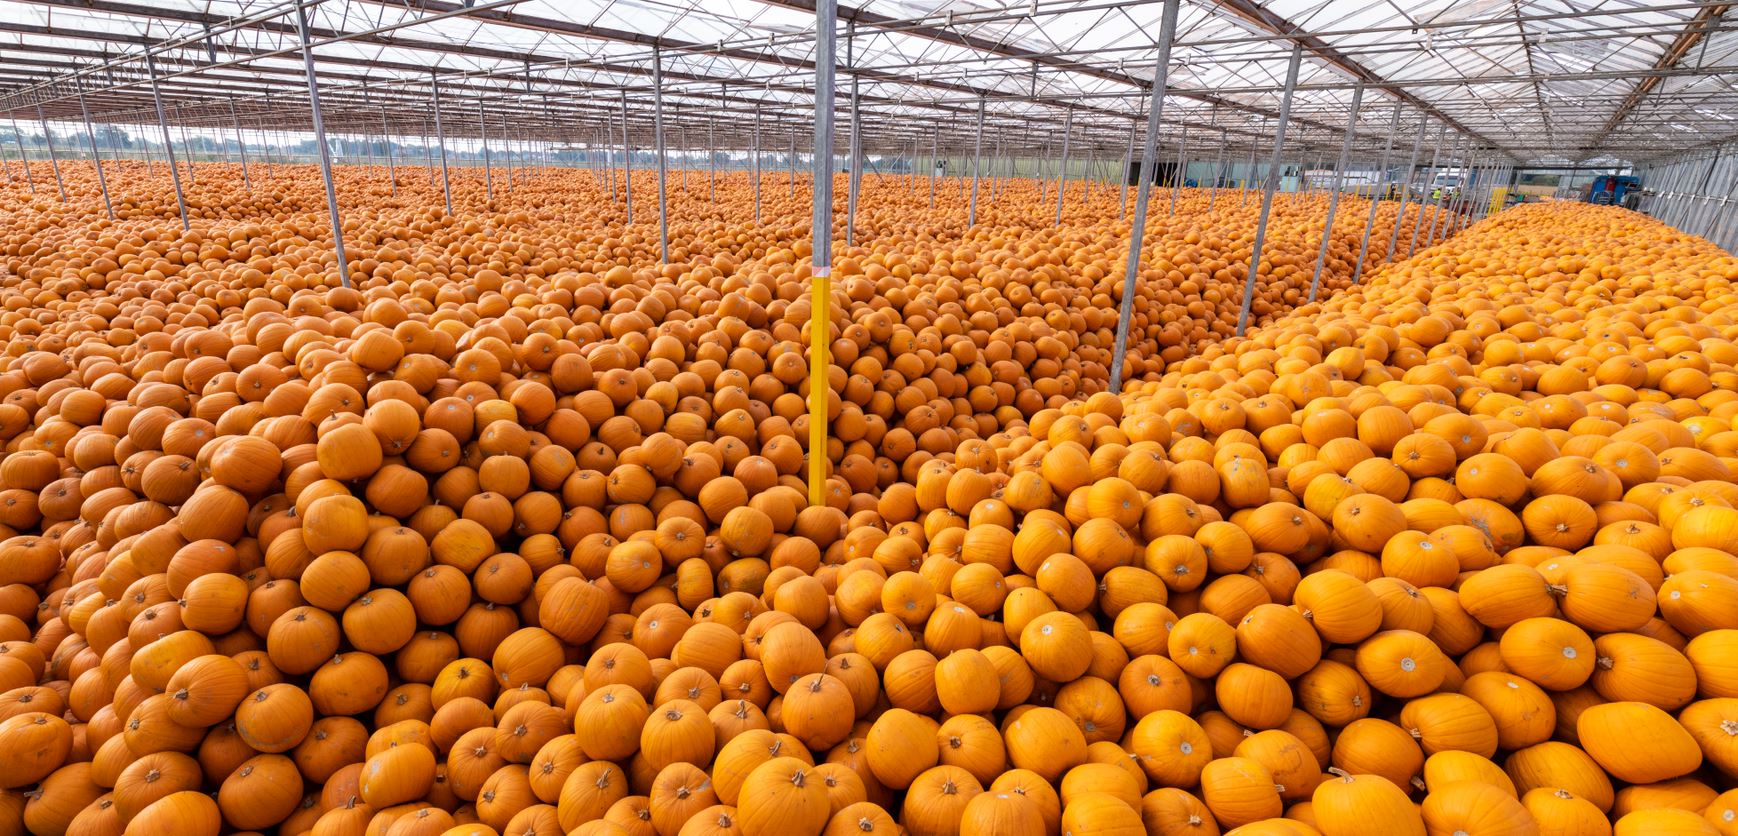 Oakley Farms, based near Wisbech, Cambridgeshire, has reported 'full availability' of pumpkins this year despite the summer heatwave. (Alan Bennett/ Tesco/ PA)